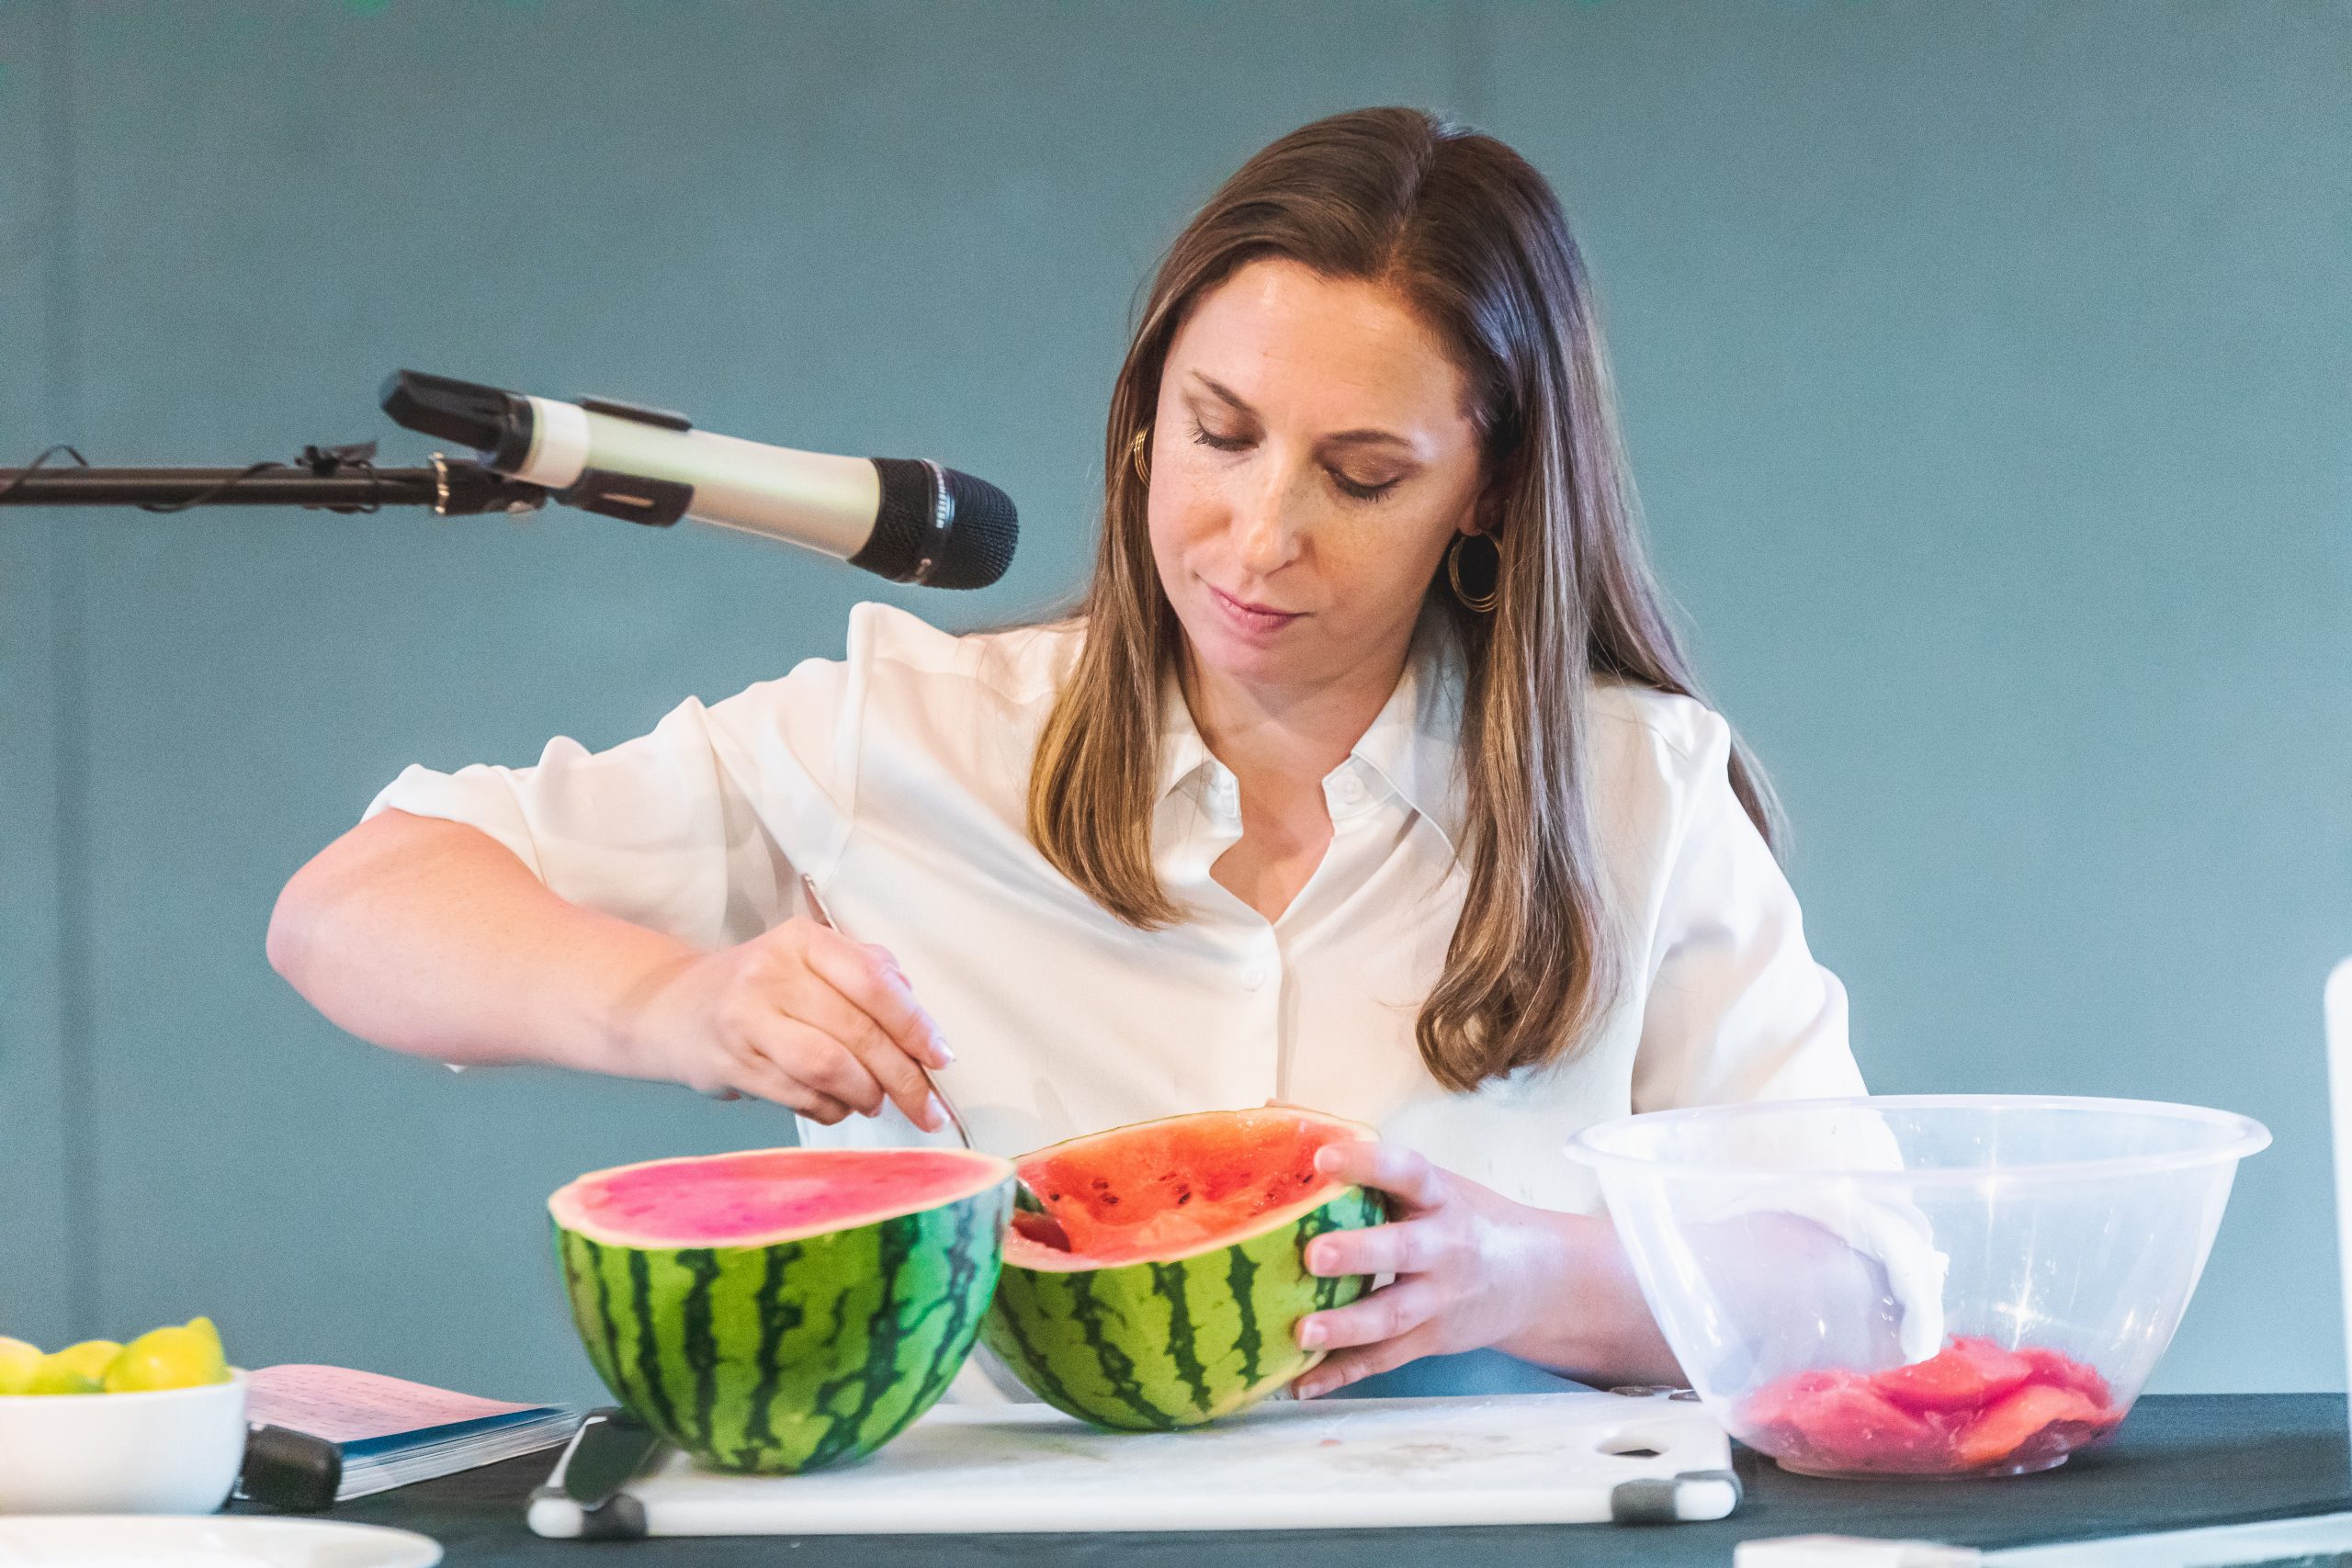 Photo of a woman seated at a table, in front of a microphone, scooping the flesh out of a watermelon, which has been cut in half, into a plastic bowl.